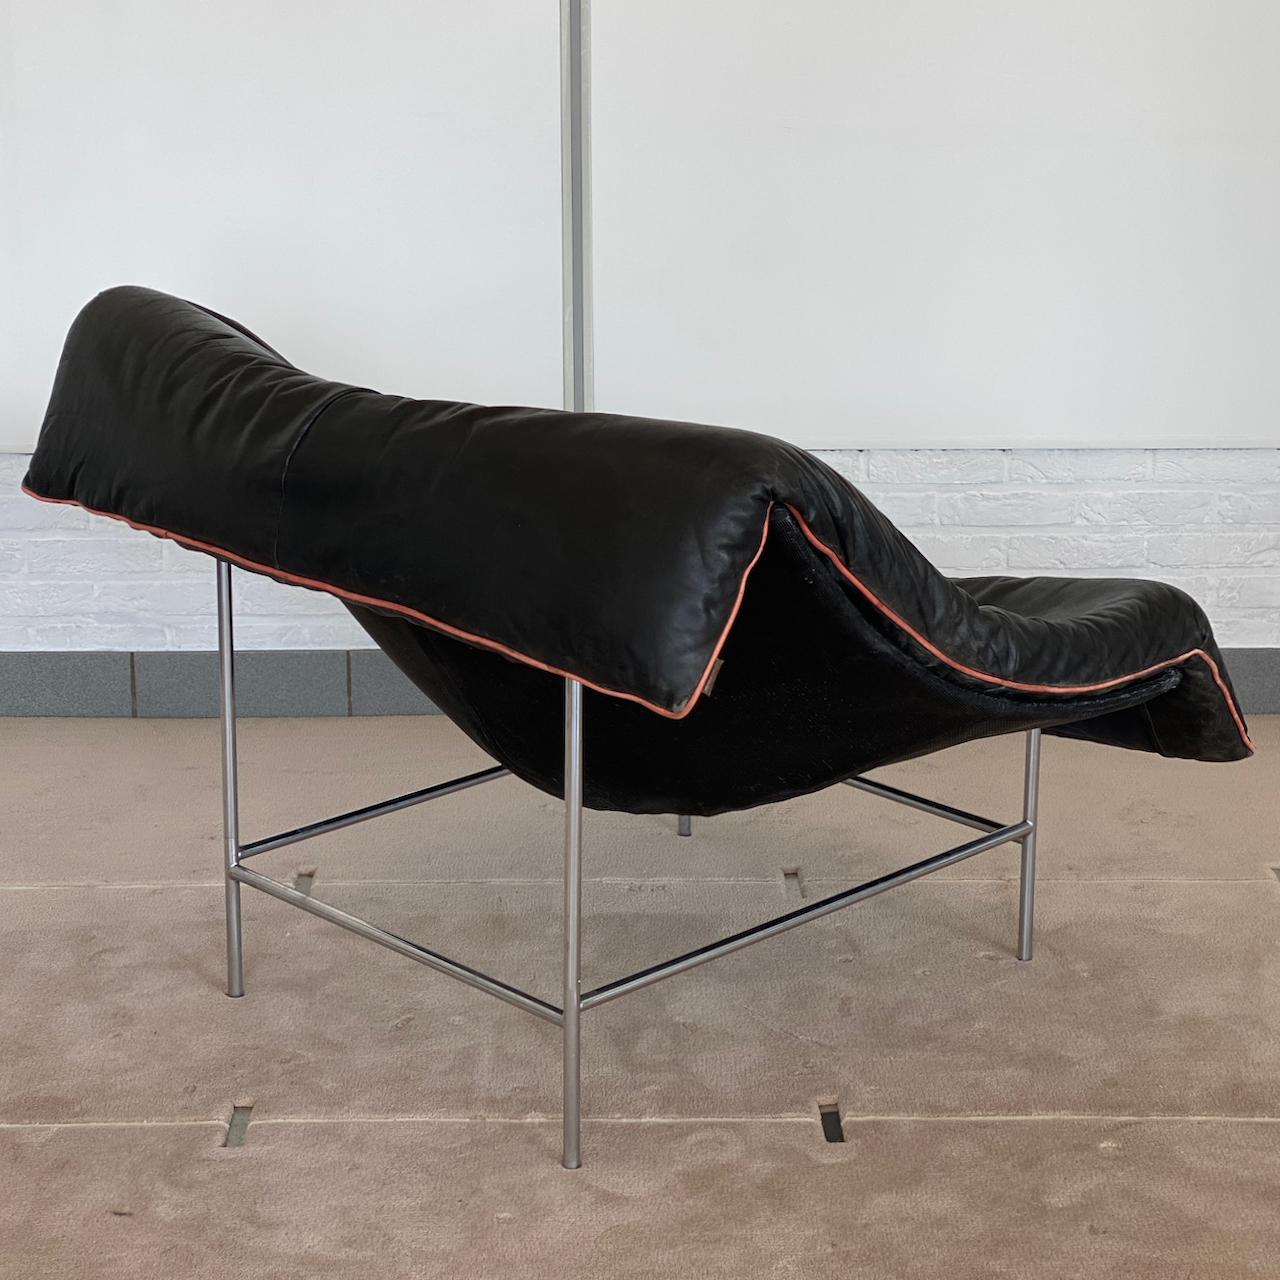 Gerard van den Berg is a dutch designer who designed some of the epic European design from the 1980's.
He was together with his brother co-owner of the Montis manufacturing company.
Gerard Van Den Berg designed this iconic Butterly chair in 1980.
He